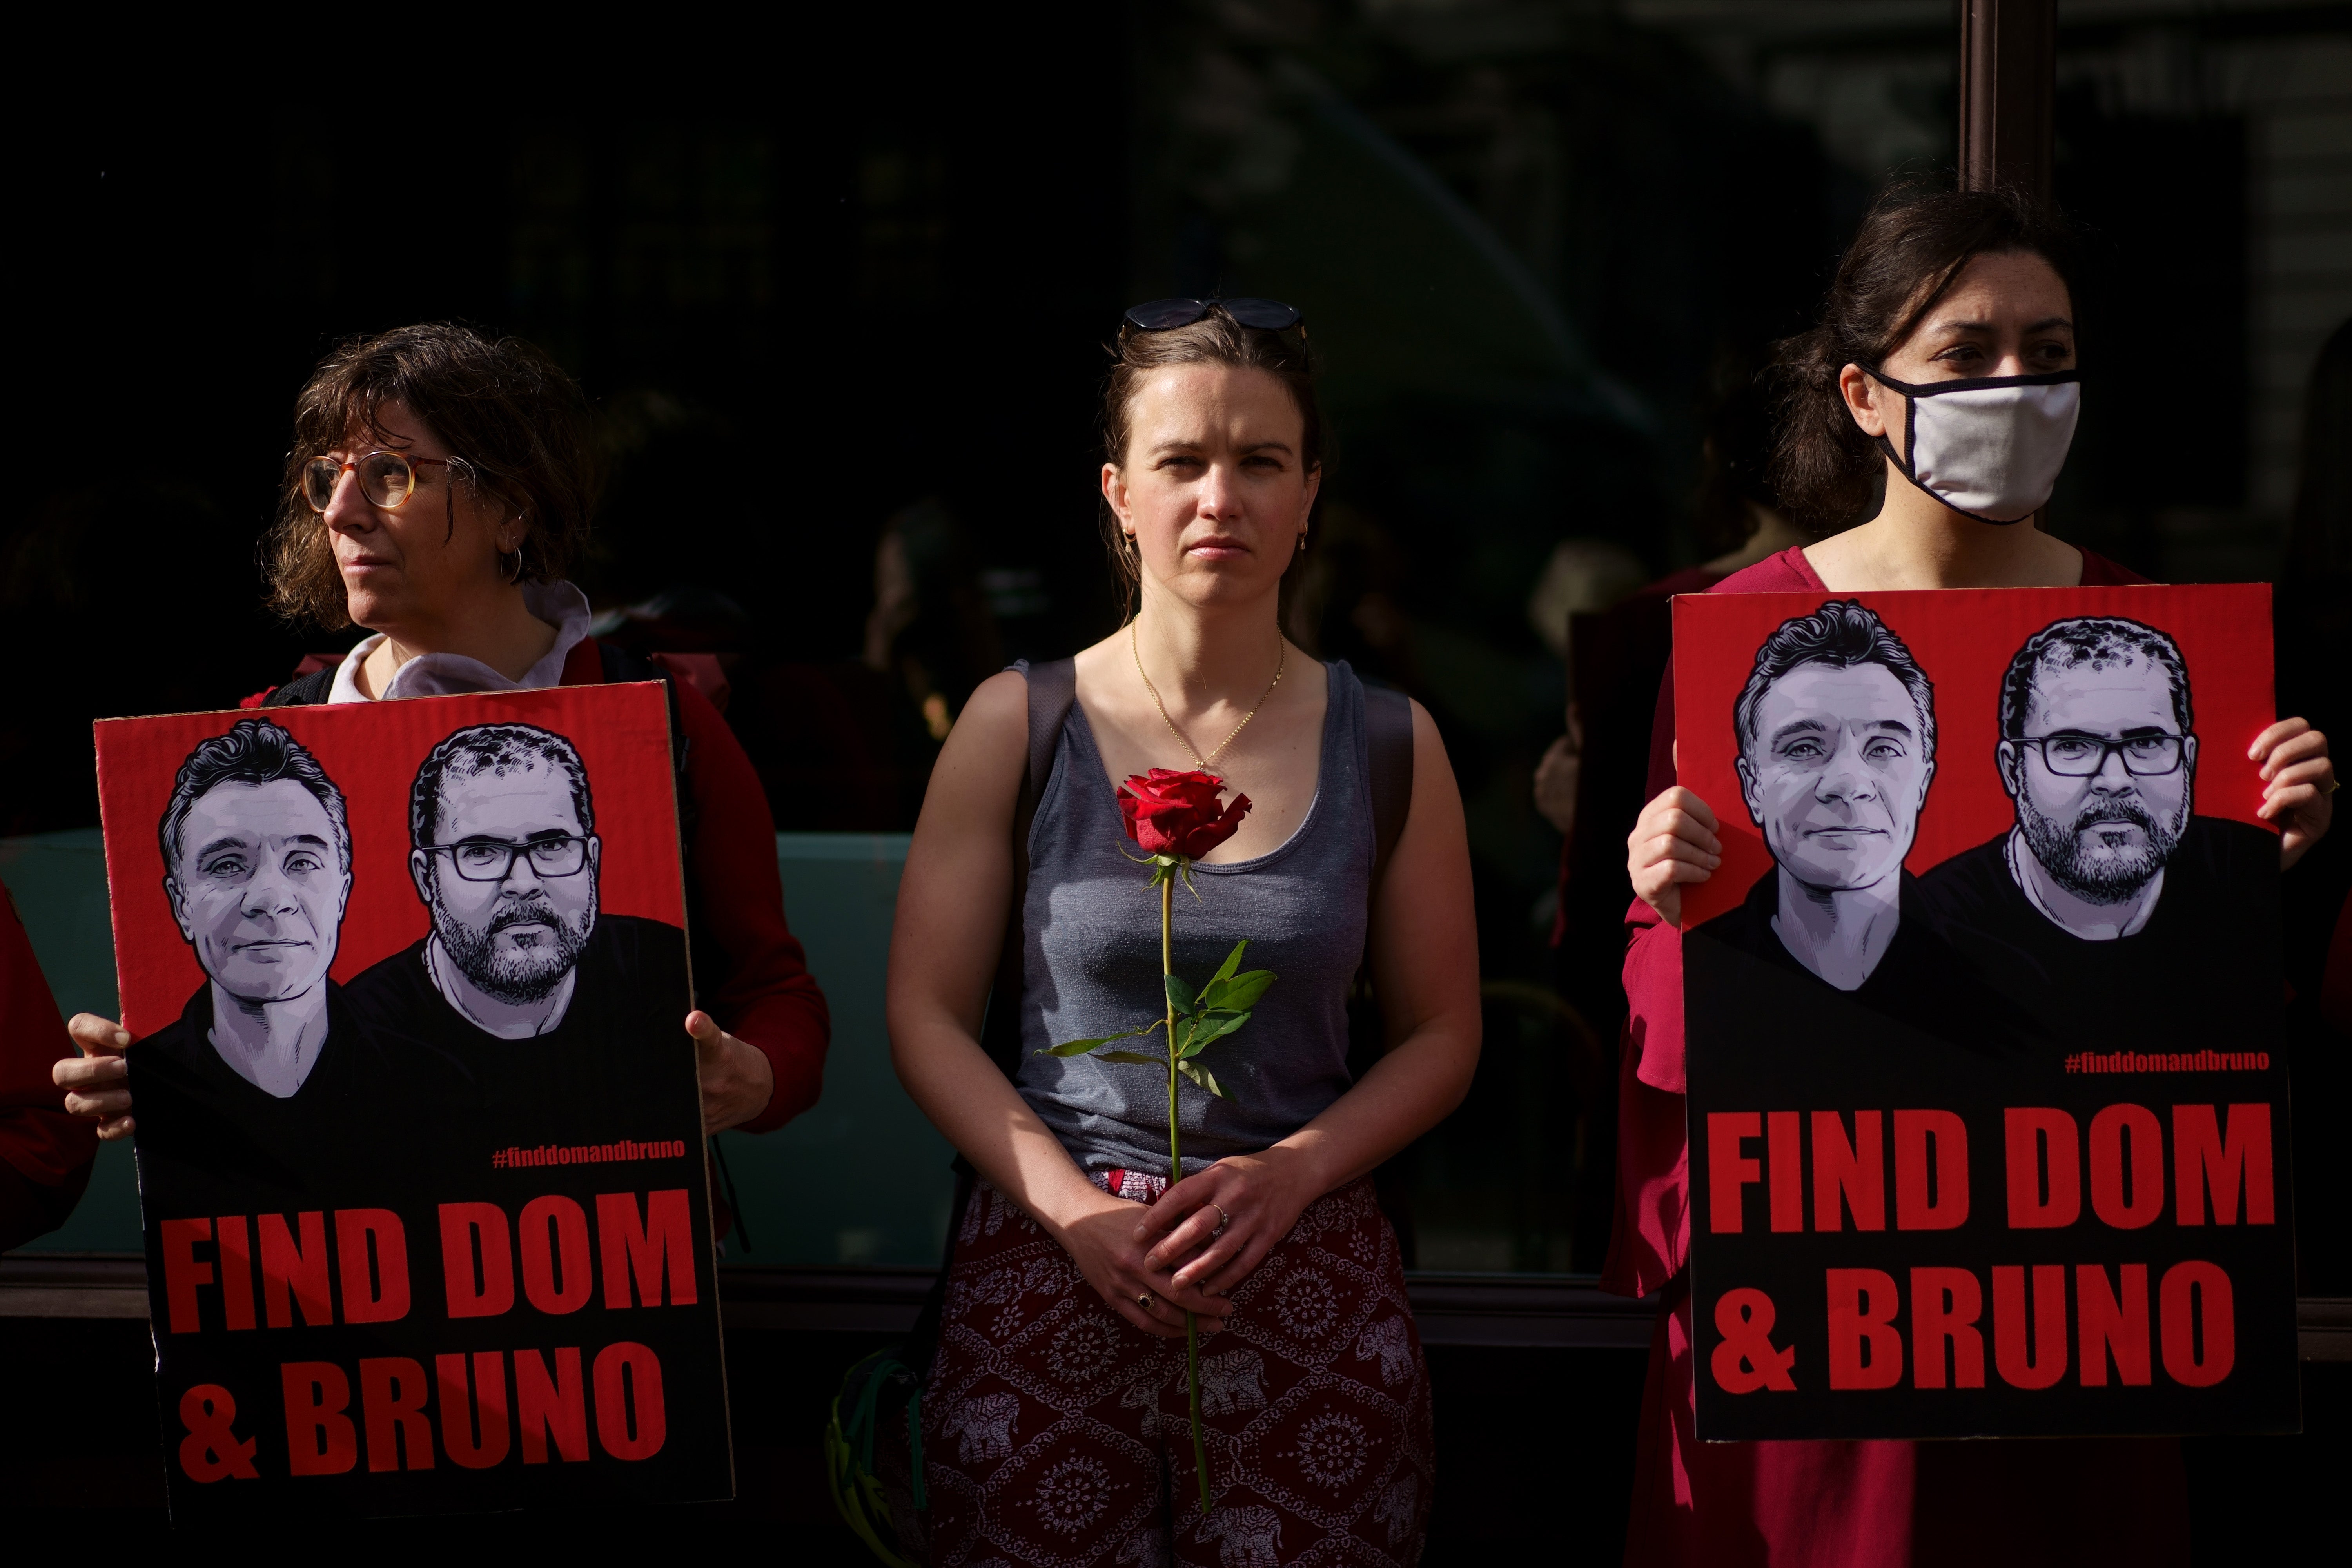 Search teams have discovered personal items belonging to missing British journalist Dom Phillips and Brazilian indigenous affairs official Bruno Pereira, Brazilian Federal Police said (Victoria Jones/PA)